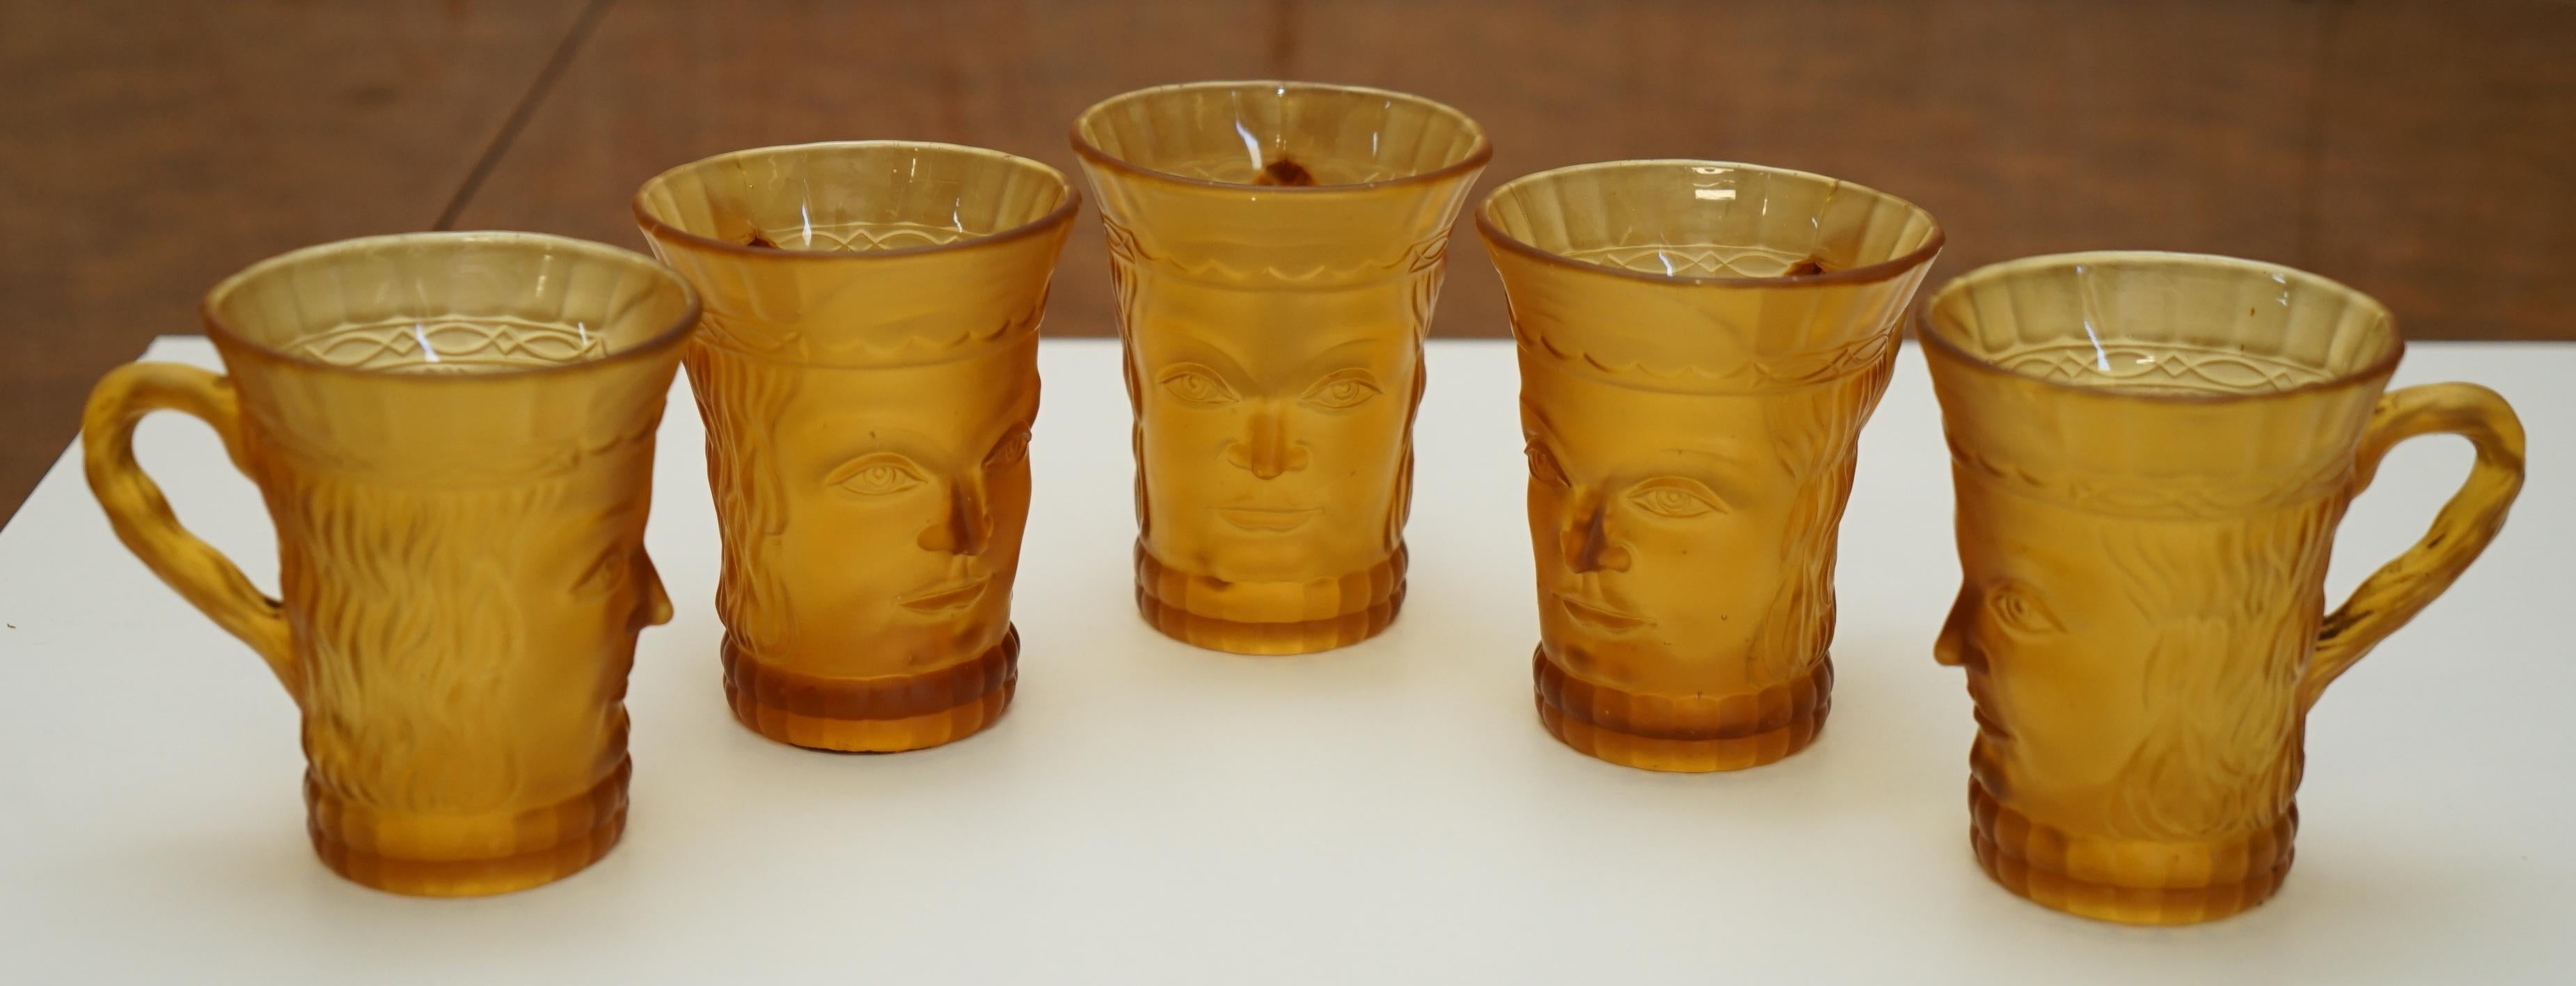 VINTAGE ART DECO CIRCA 1920'S AMBER FACE GLASS CUP SET WITH LARGE PiTCHER JUG For Sale 2